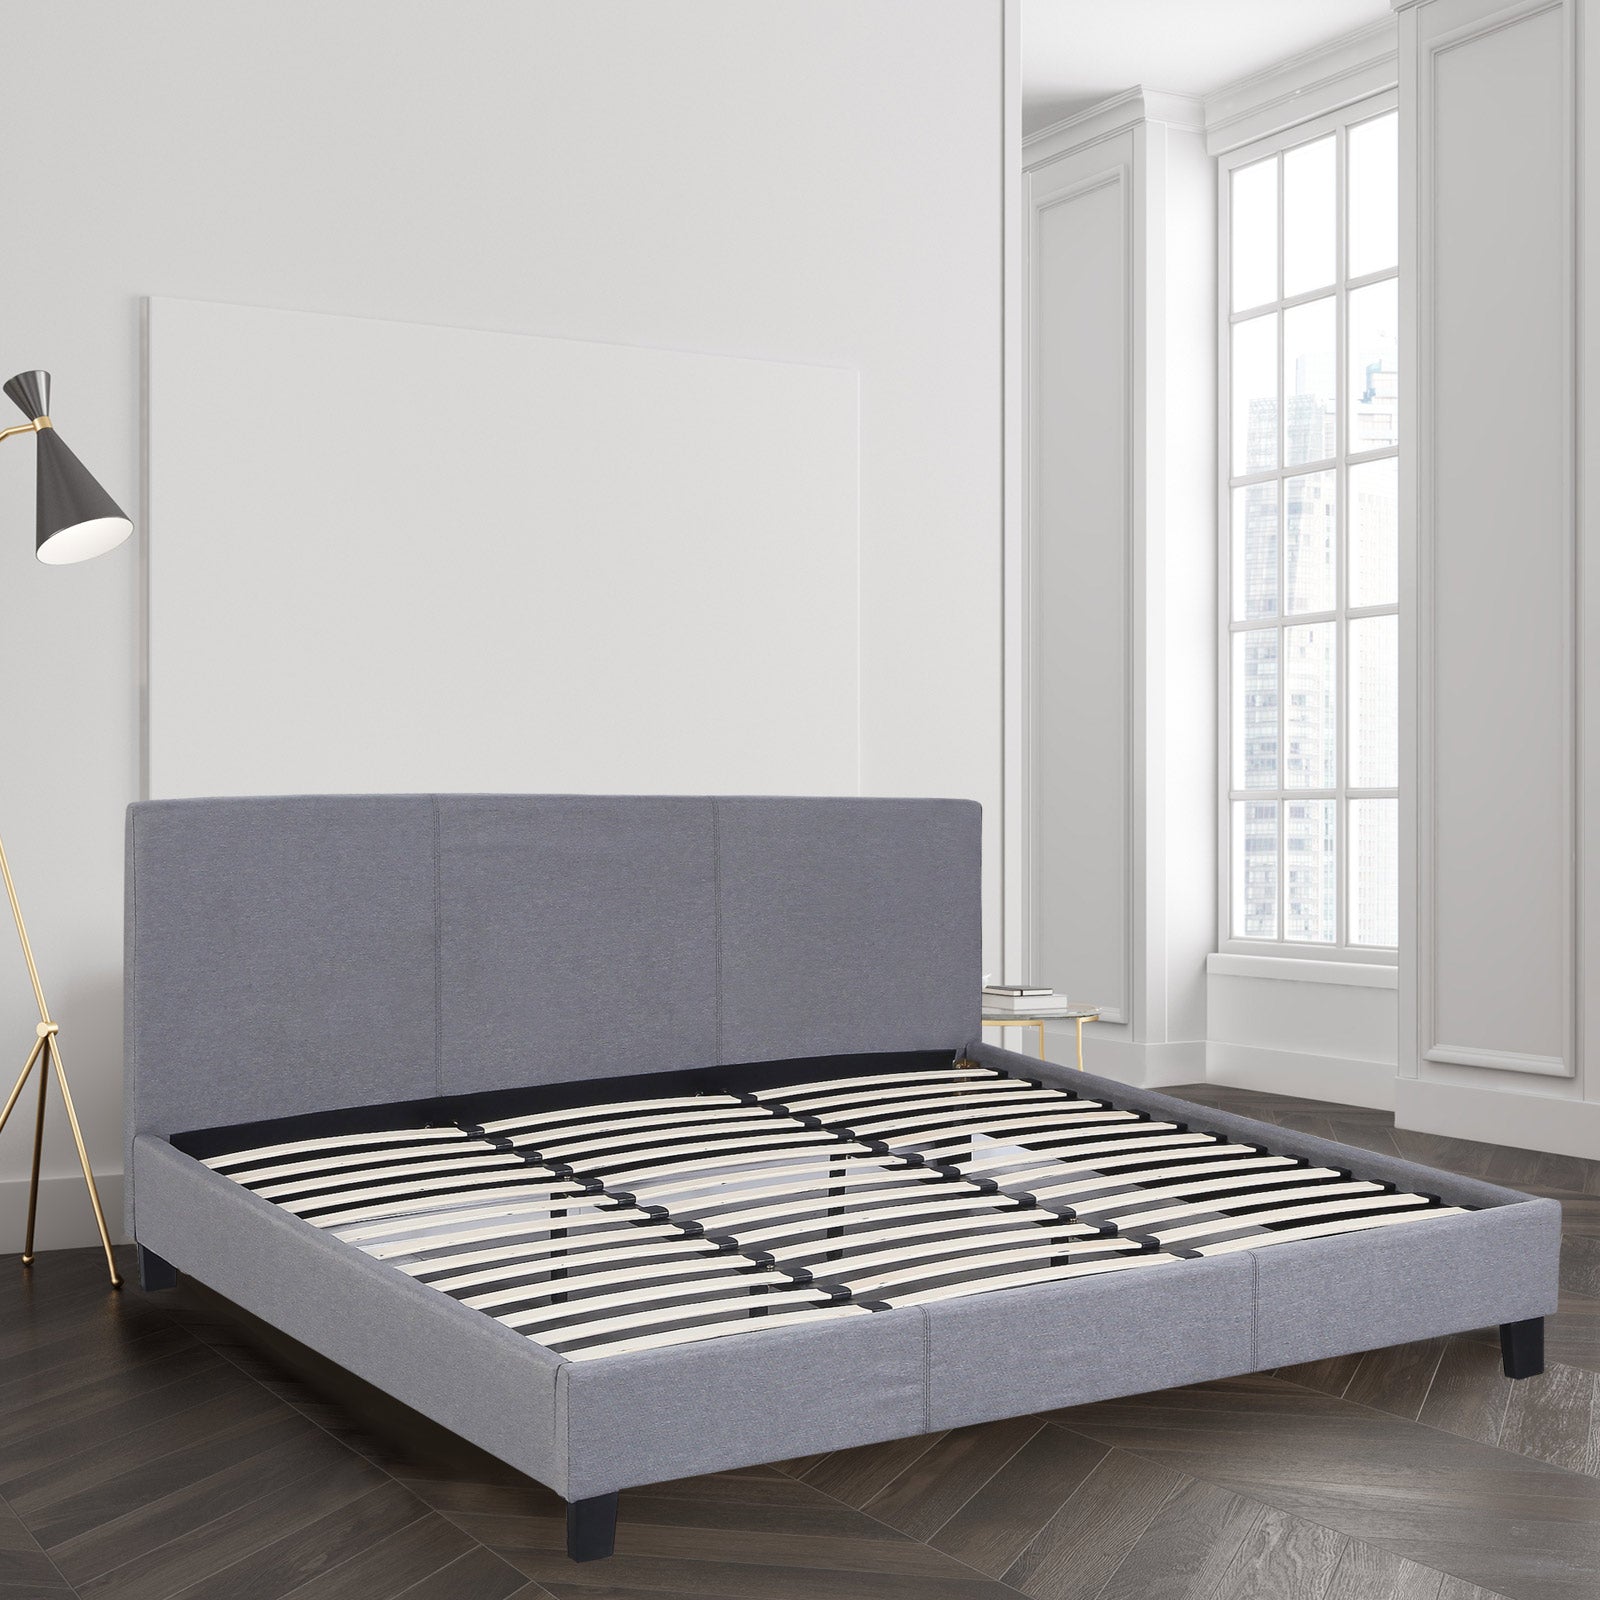 Milano Sienna Luxury Bed with Headboard (Model 2) - Grey No.28 - Double